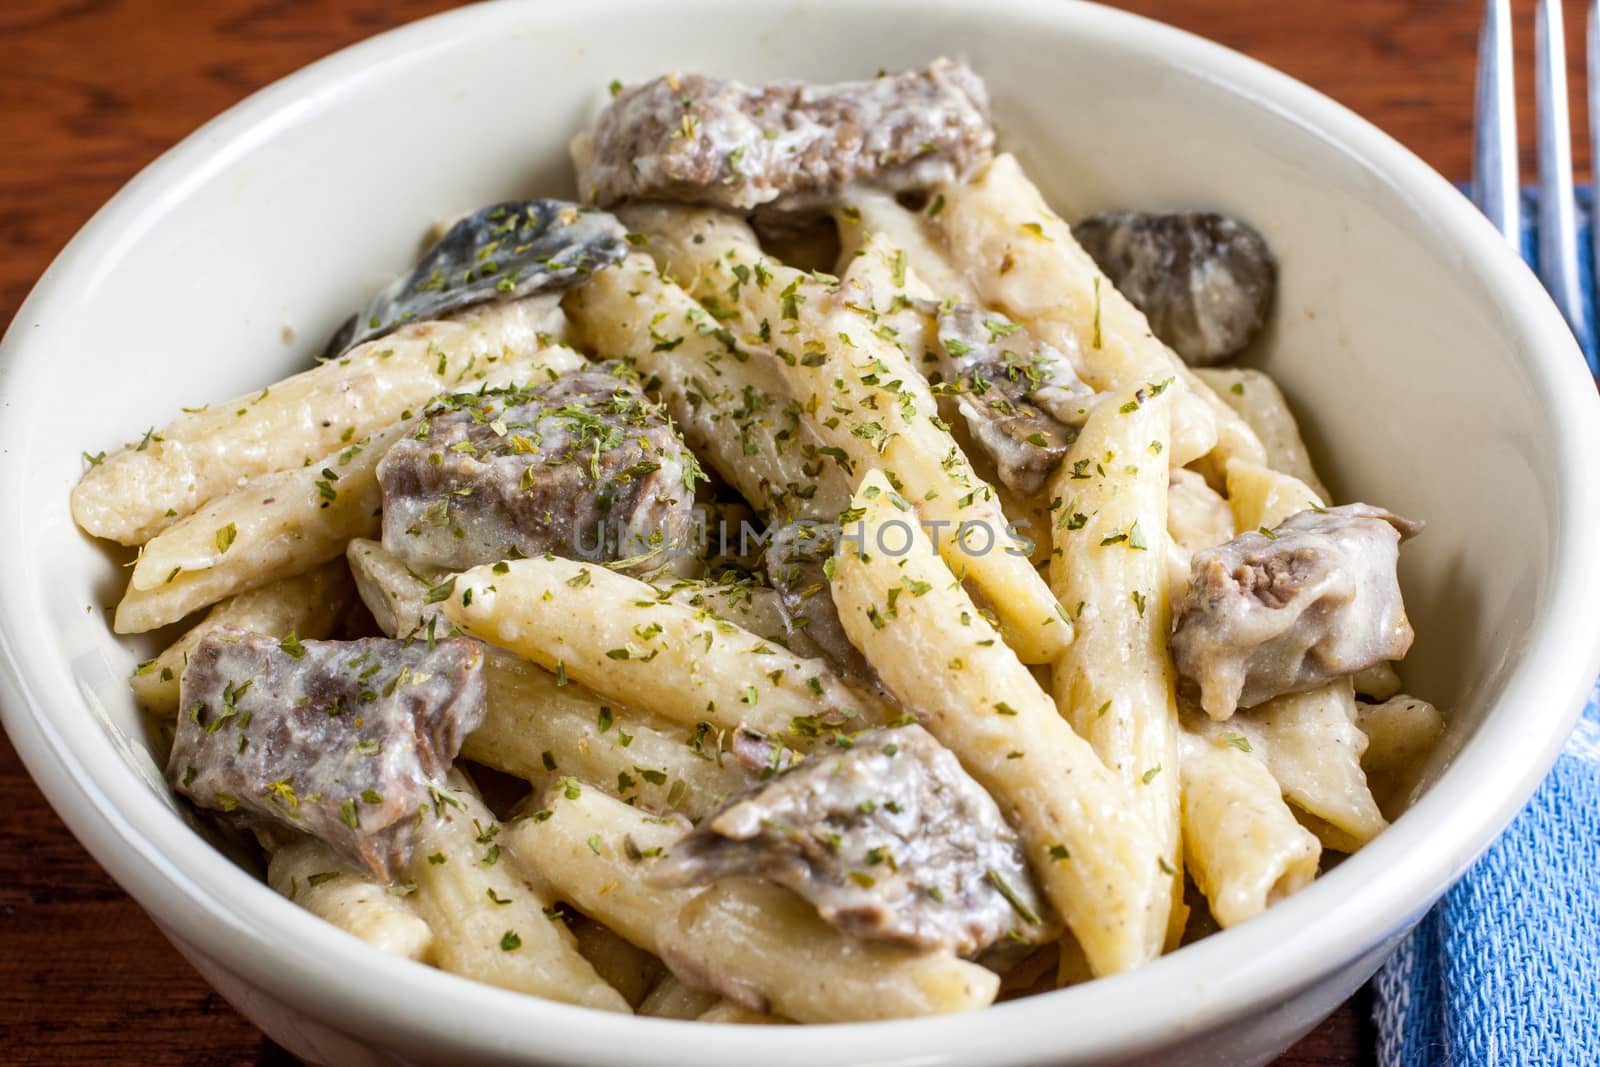 A bowl of rustic beef stroganoff on a wooden table.